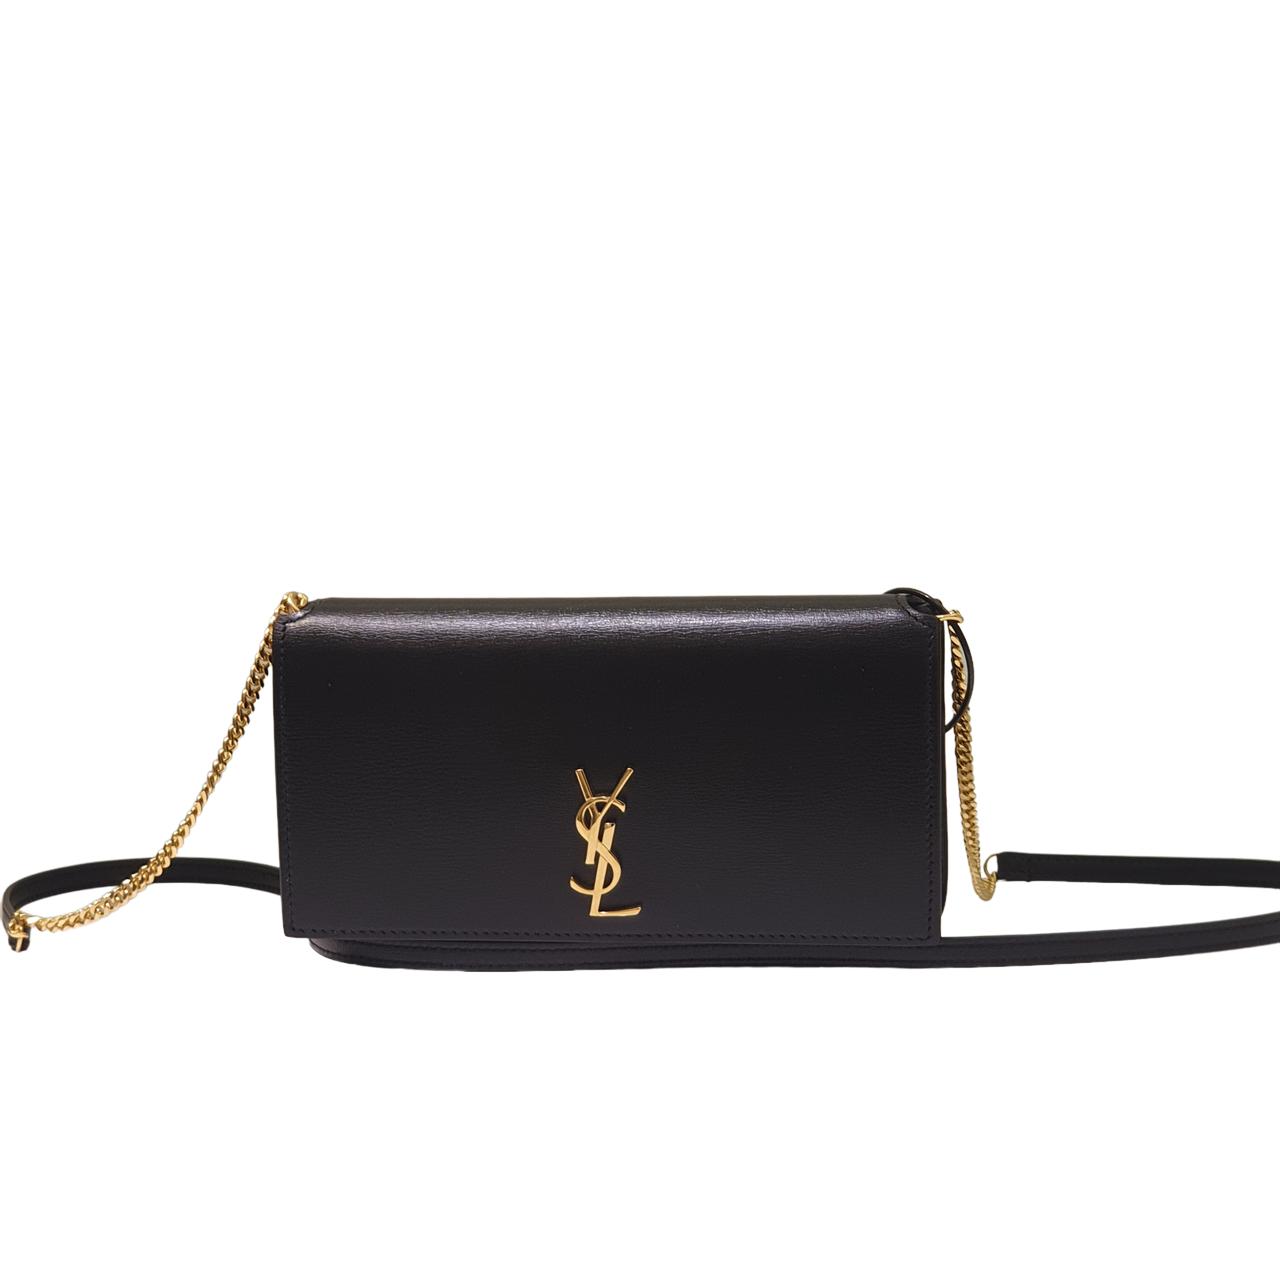 YSL black phone holder with strap in smooth leather